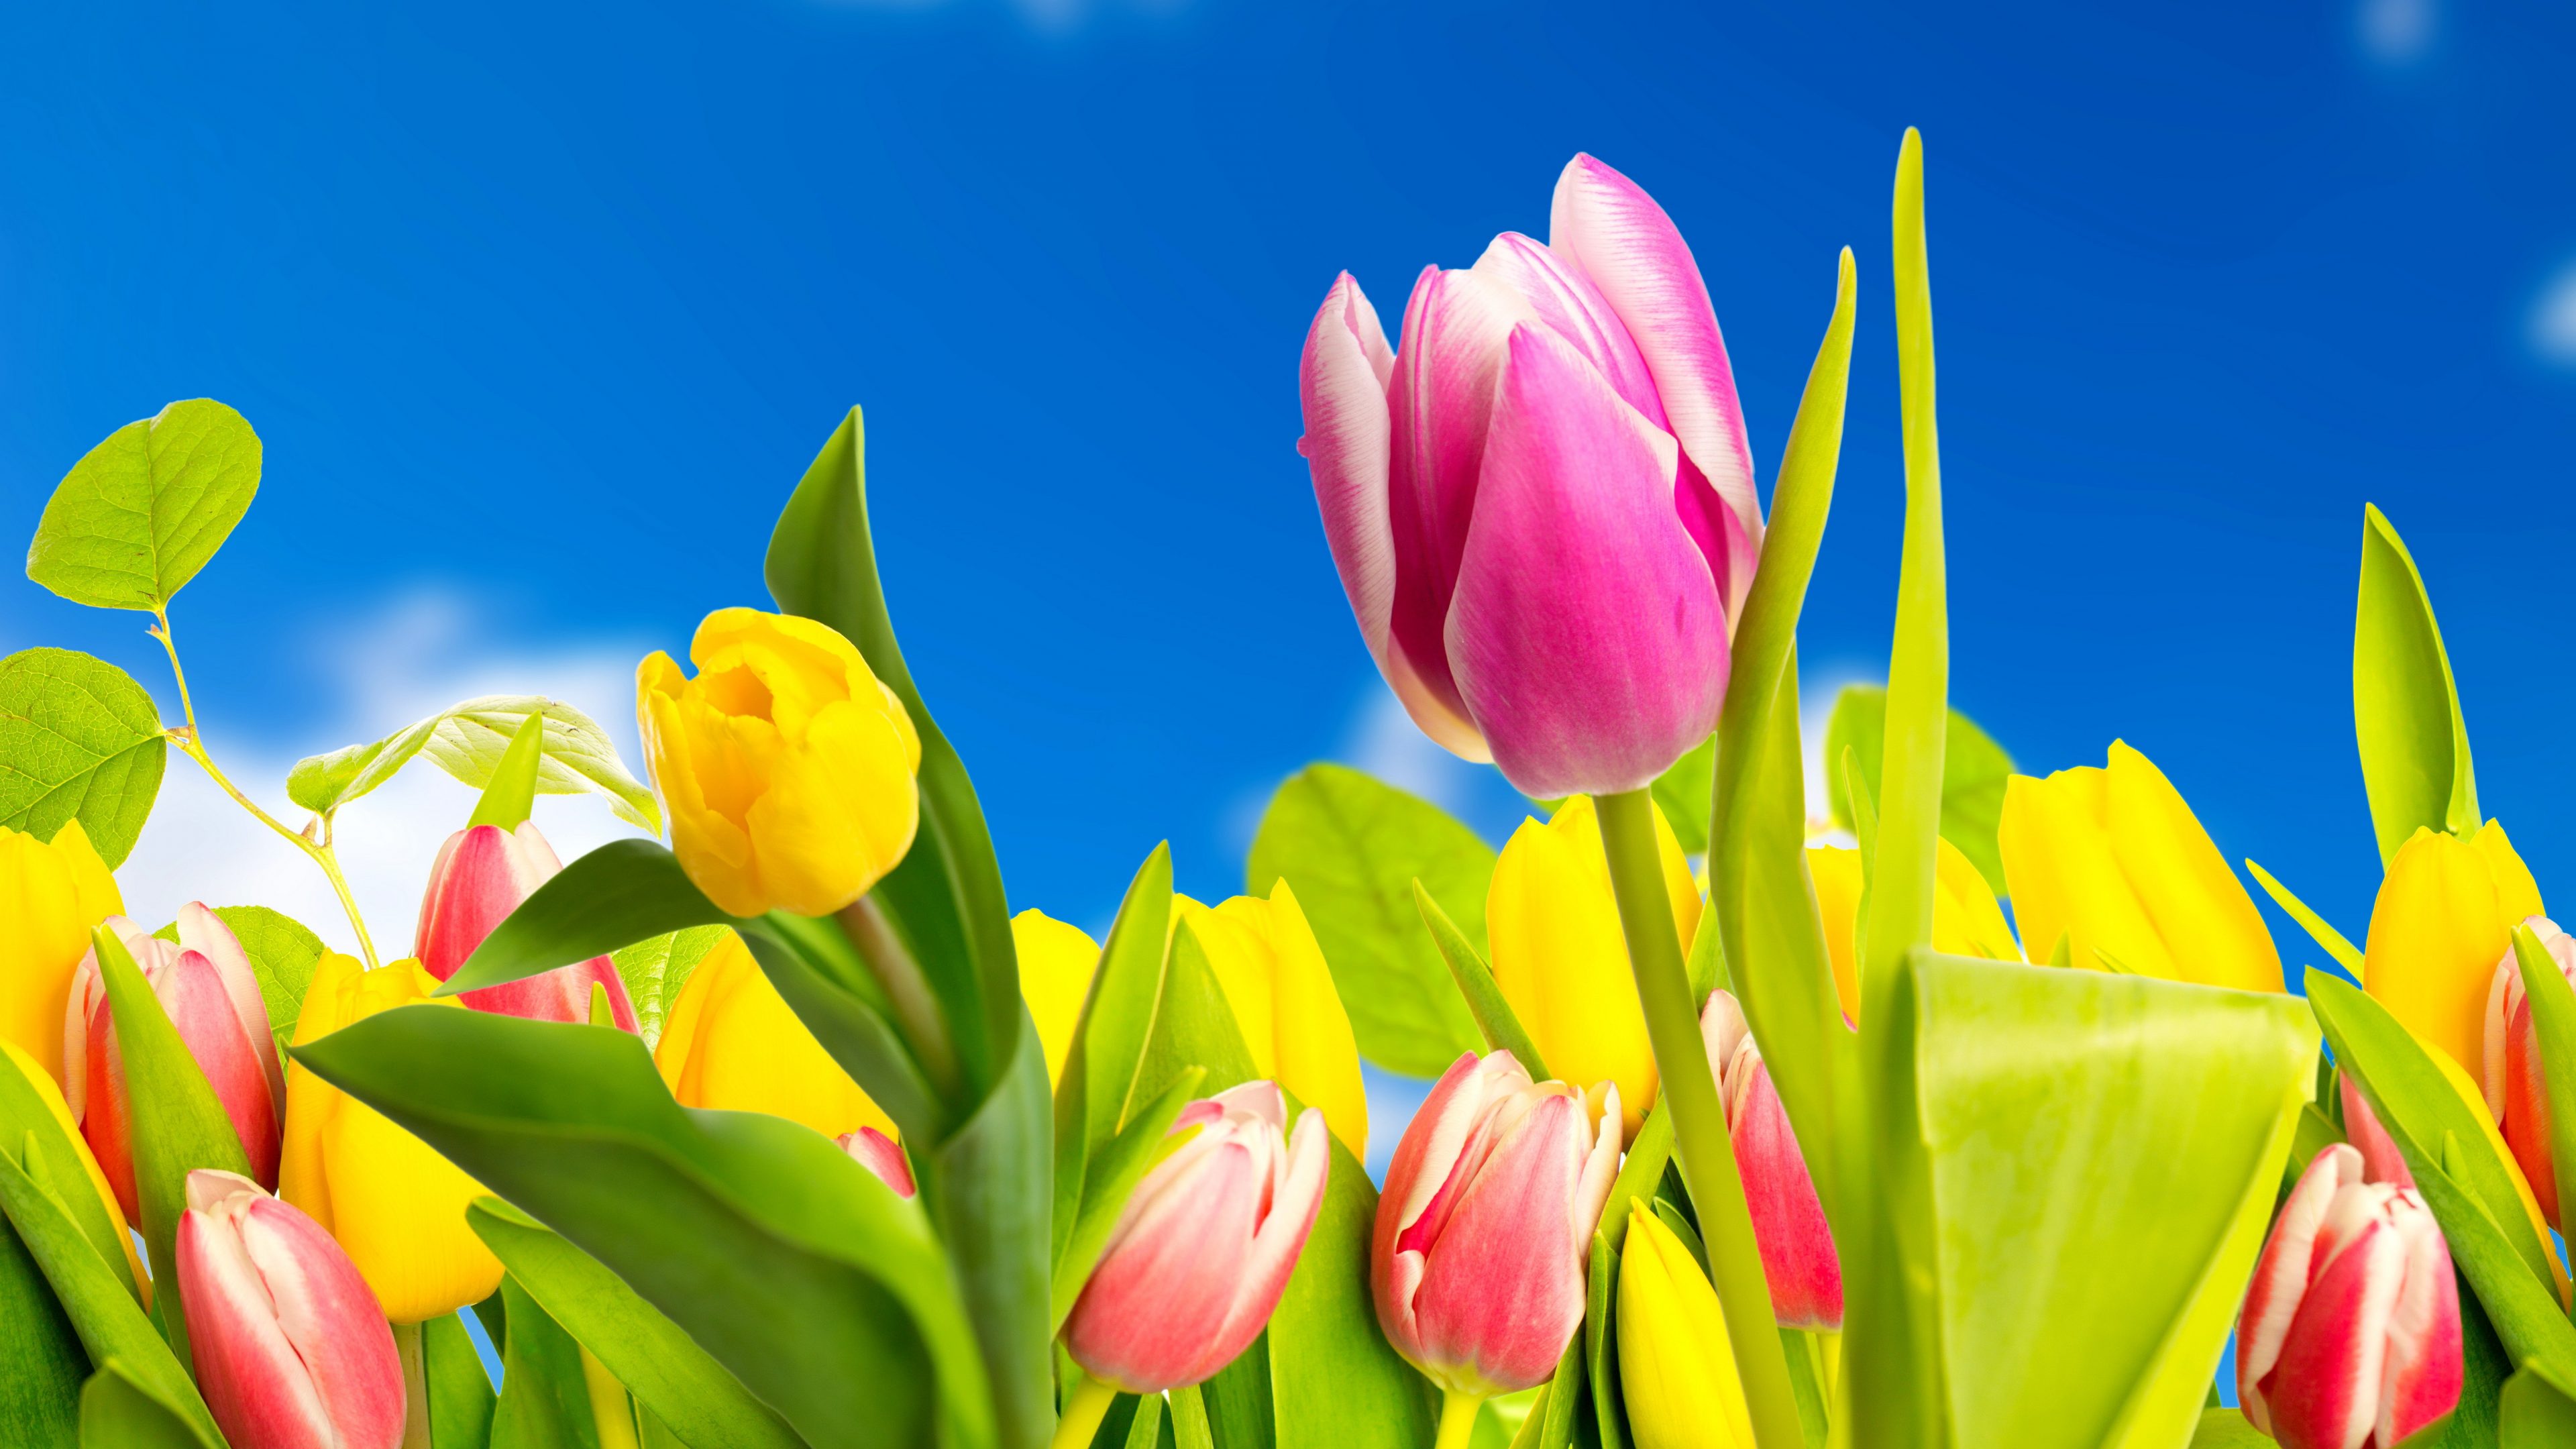 Download Yellow Flower Pink Flower Spring Colorful Flower Nature Tulip 4k Ultra Hd Wallpaper